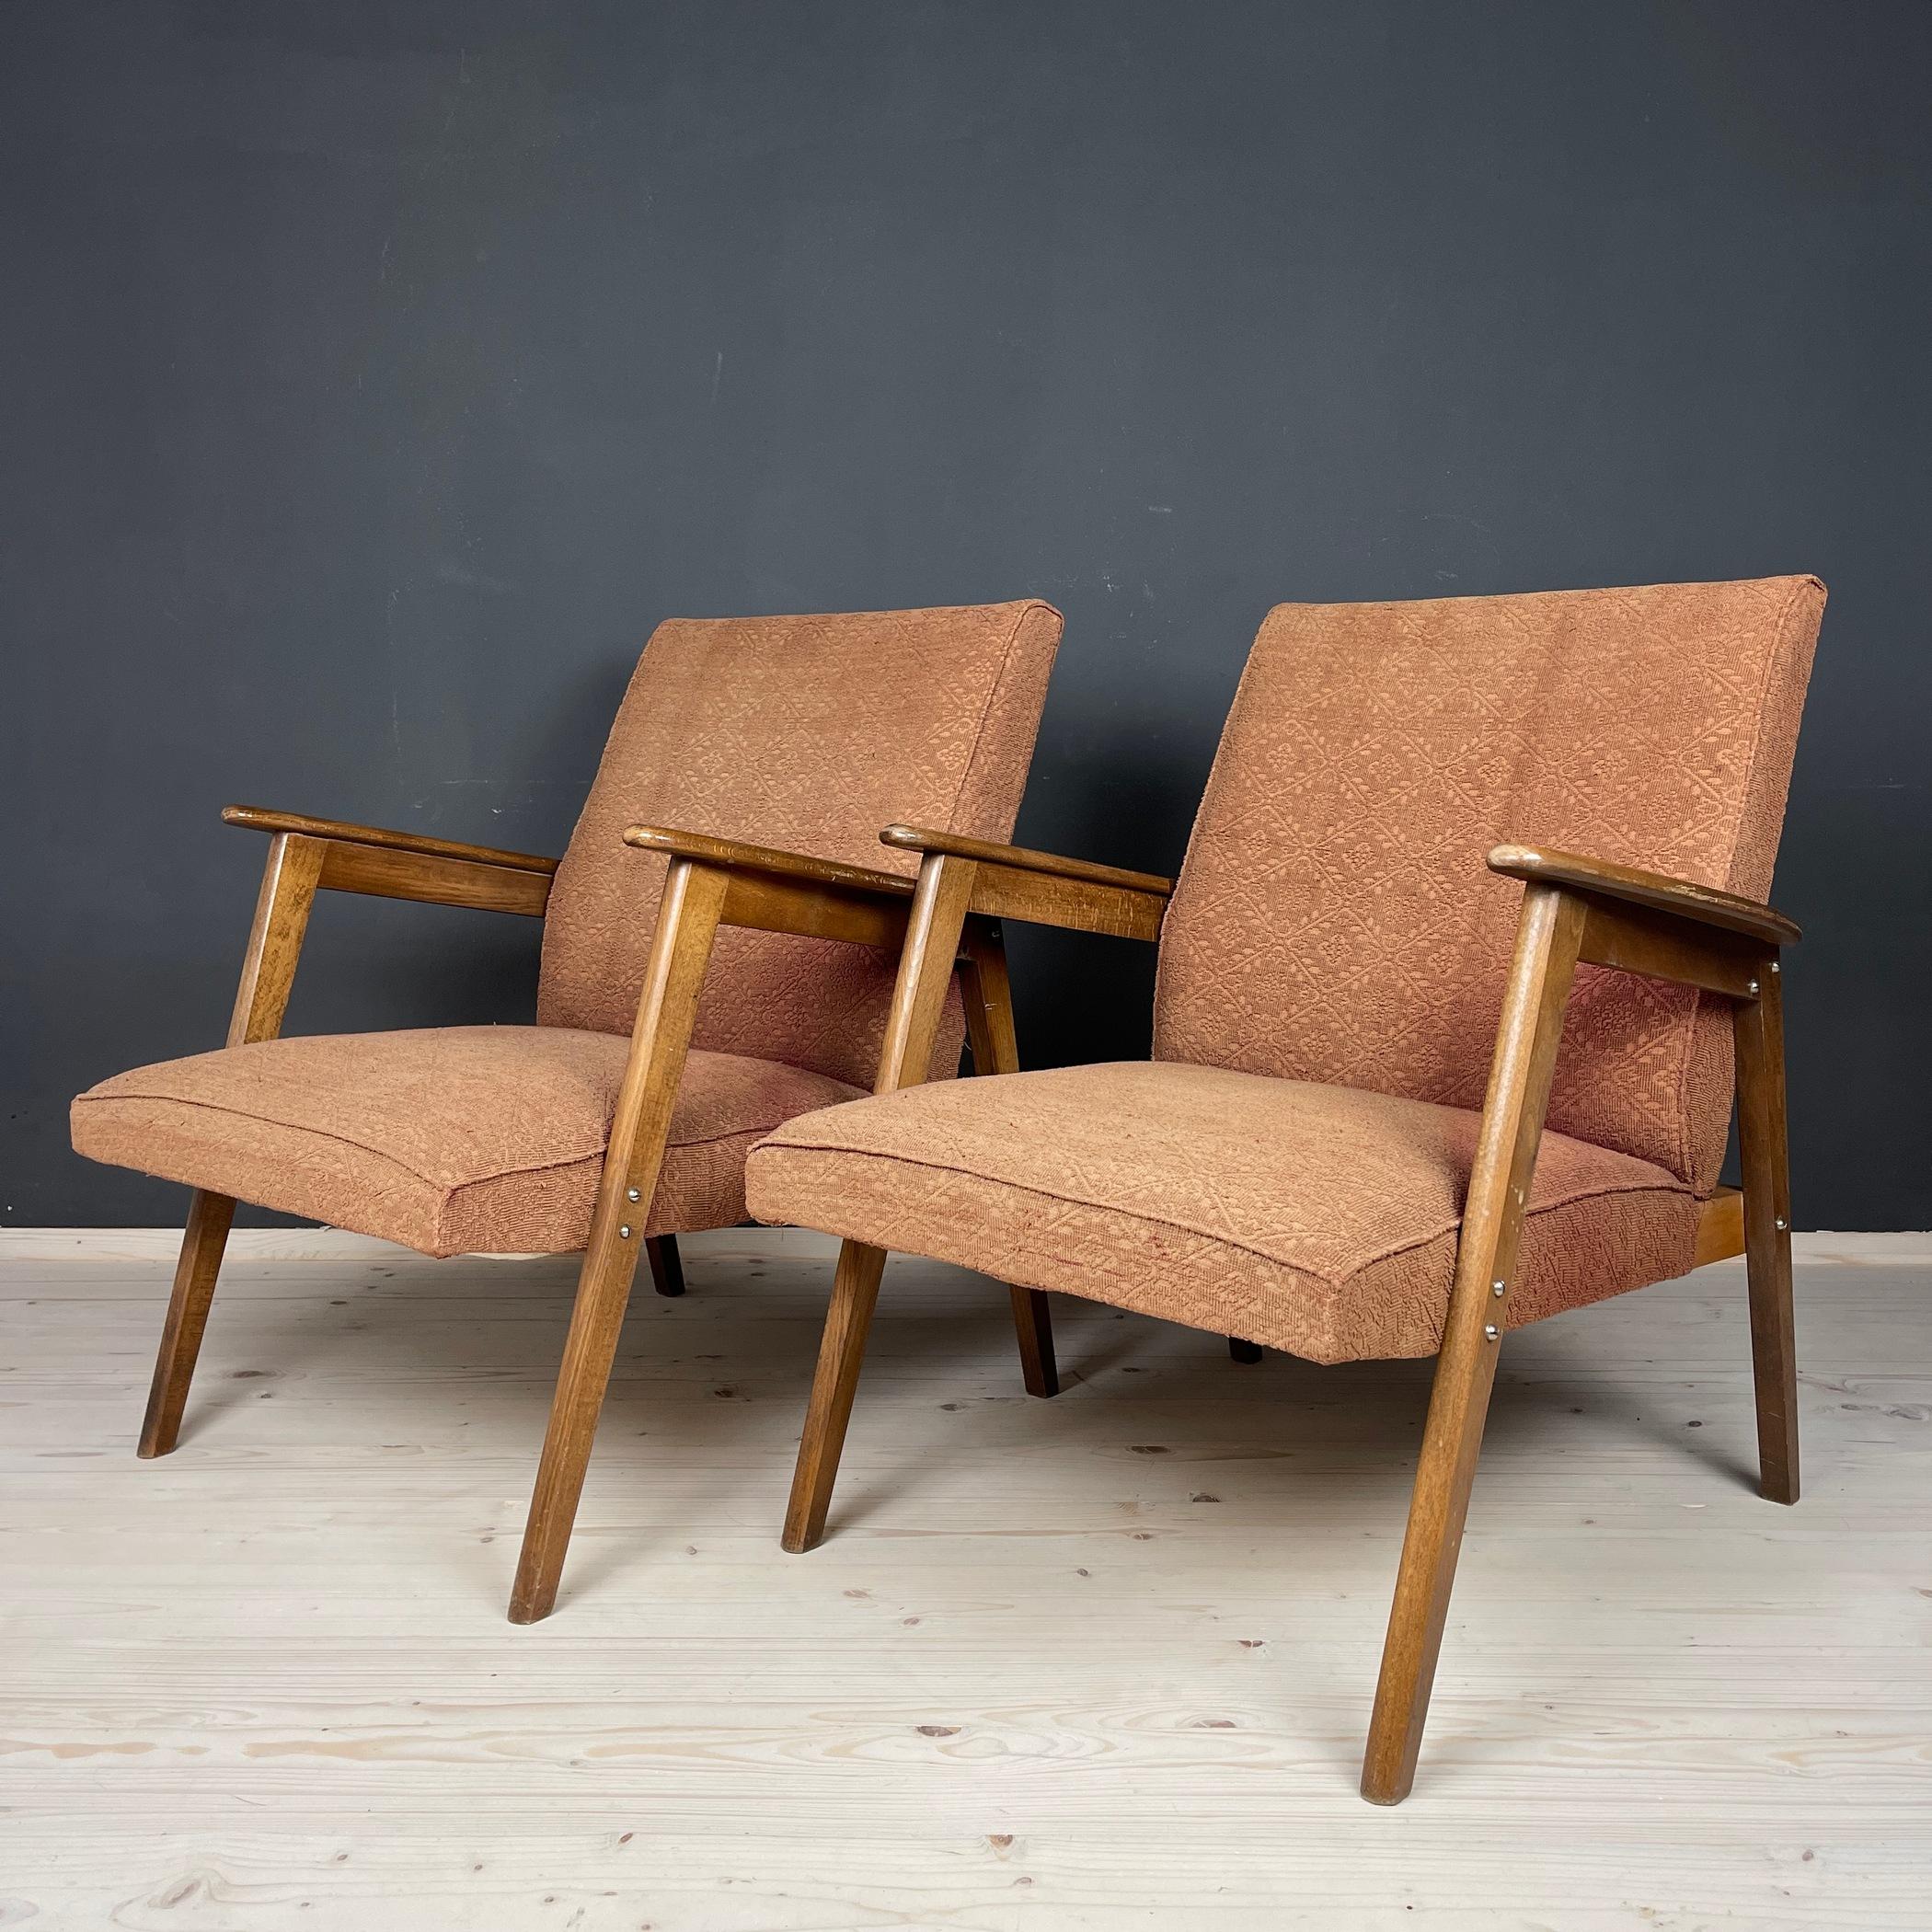 Introducing a stunning pair of red-brown mid-century armchairs, exquisitely crafted in Yugoslavia during the 1960s. These rare gems, in good condition, boast their original fabric, the quality of which is clearly depicted in the accompanying